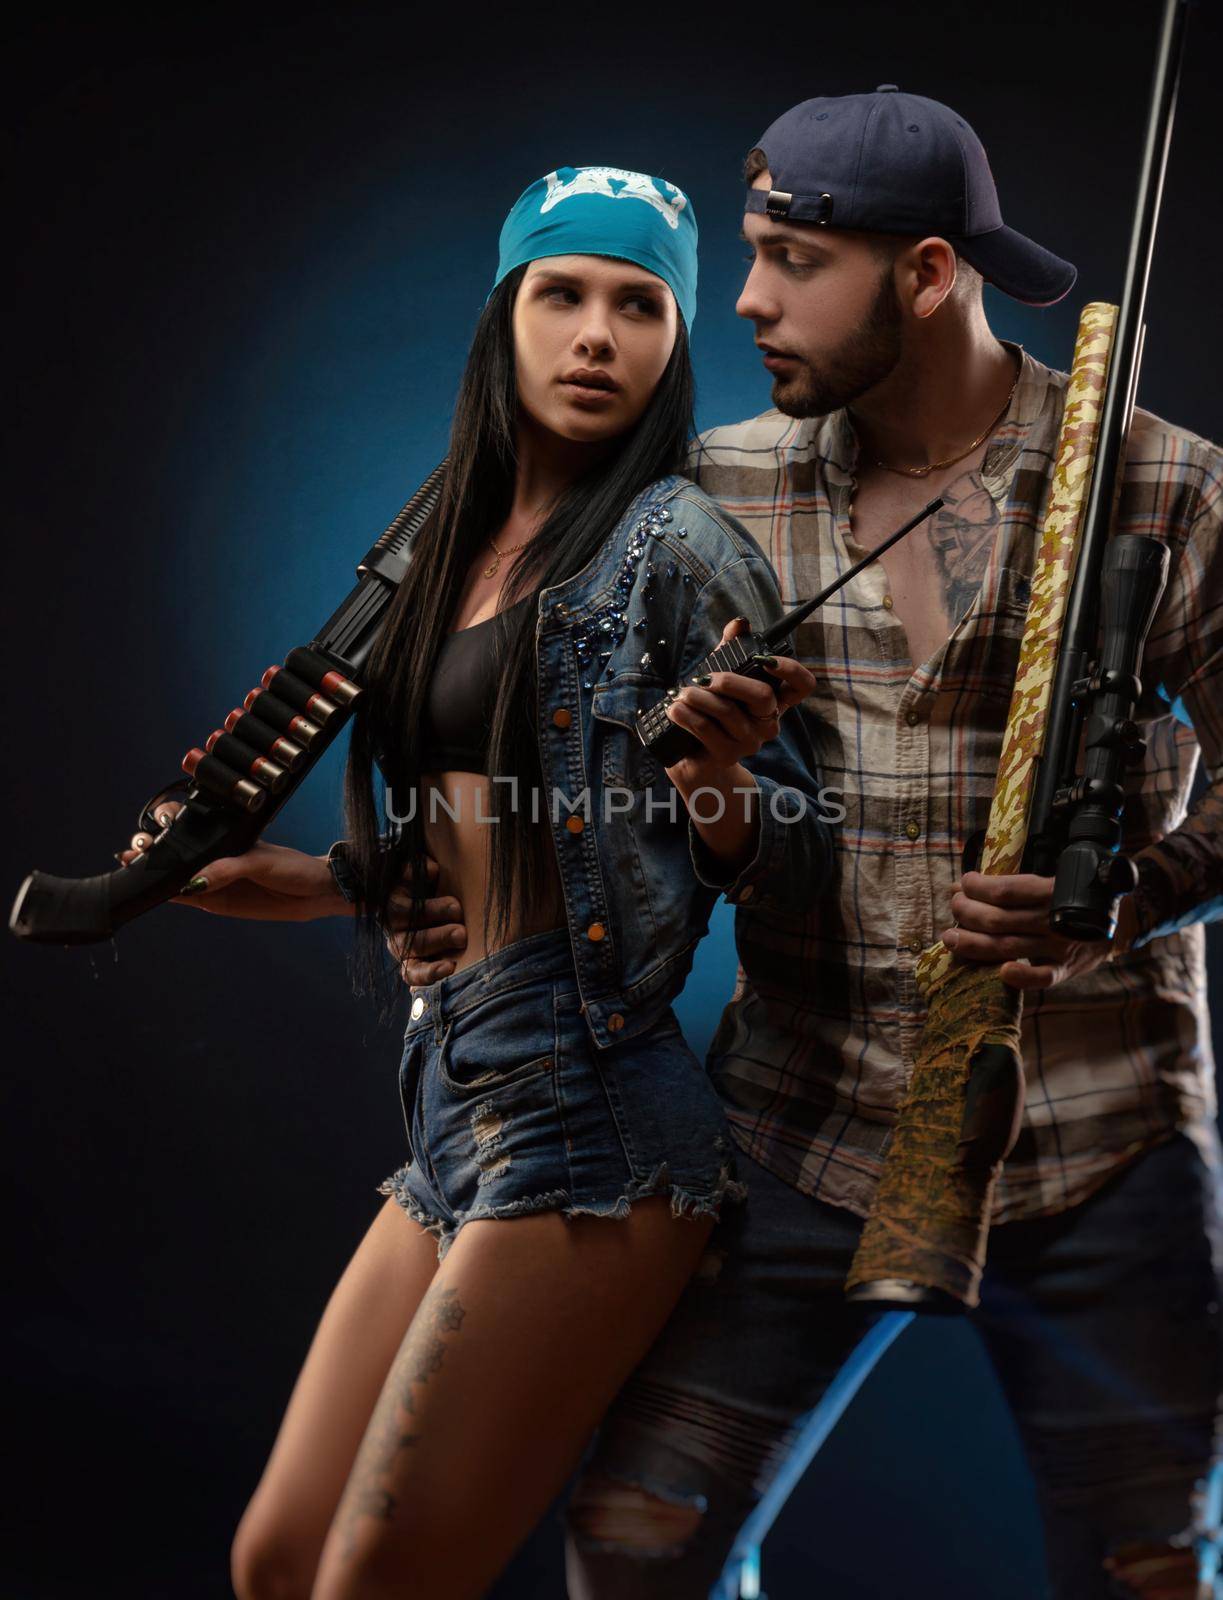 the girl and a guy with a gun